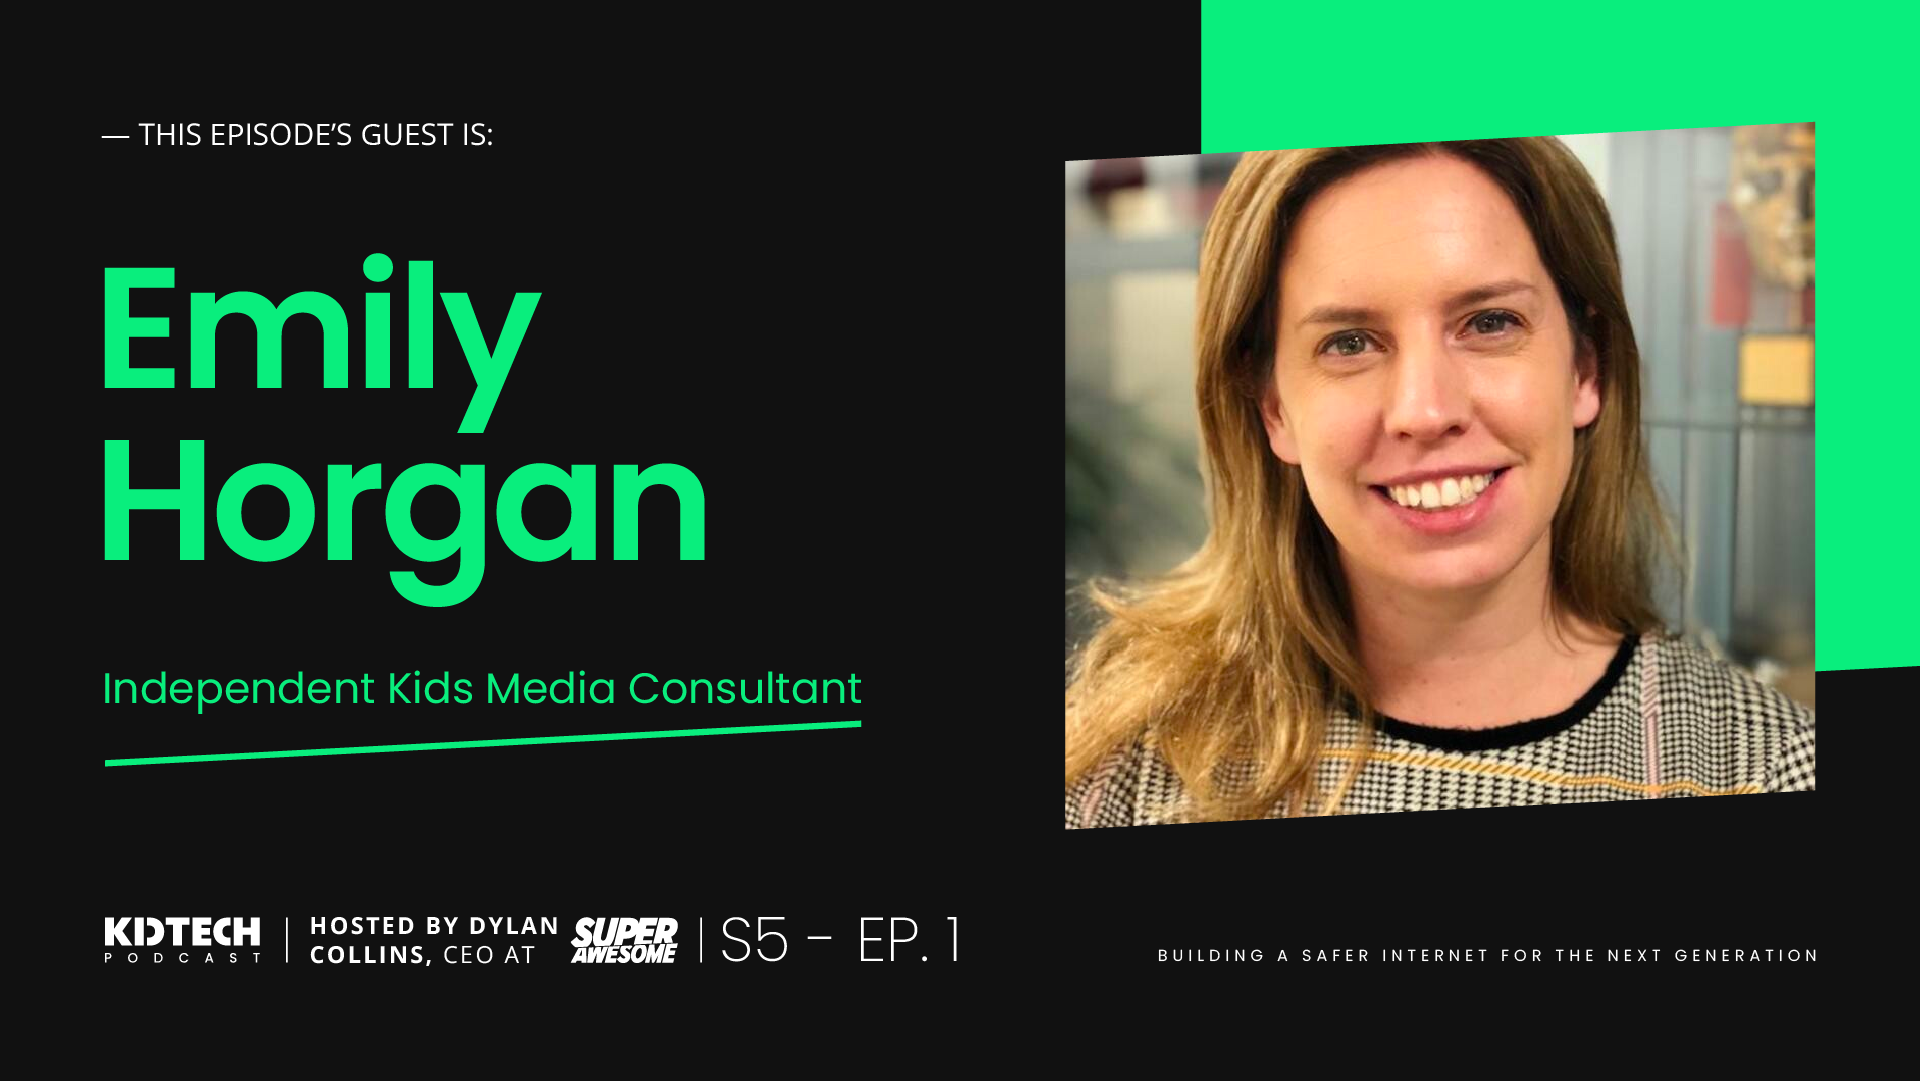 Media Consultant Emily Horgan on the Future of Kids Entertainment: #Kidtech Podcast S5E1